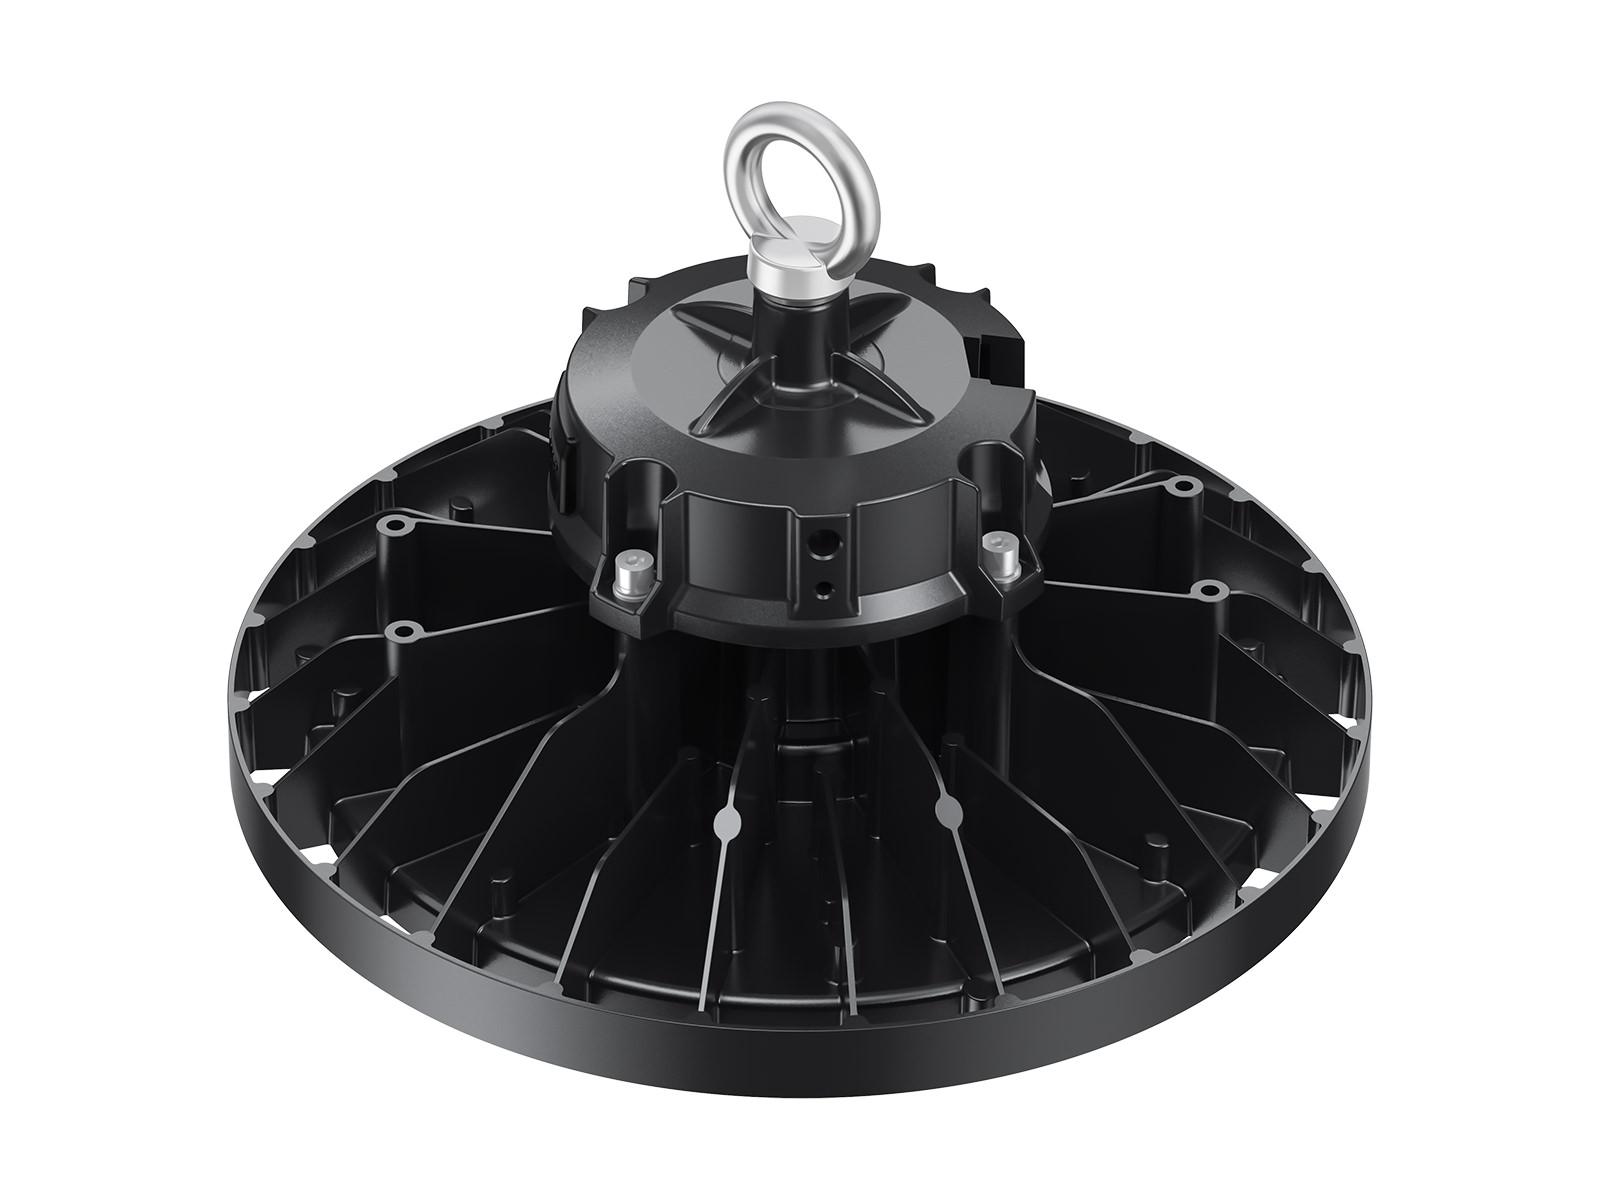 HB57 power selectable led high bay